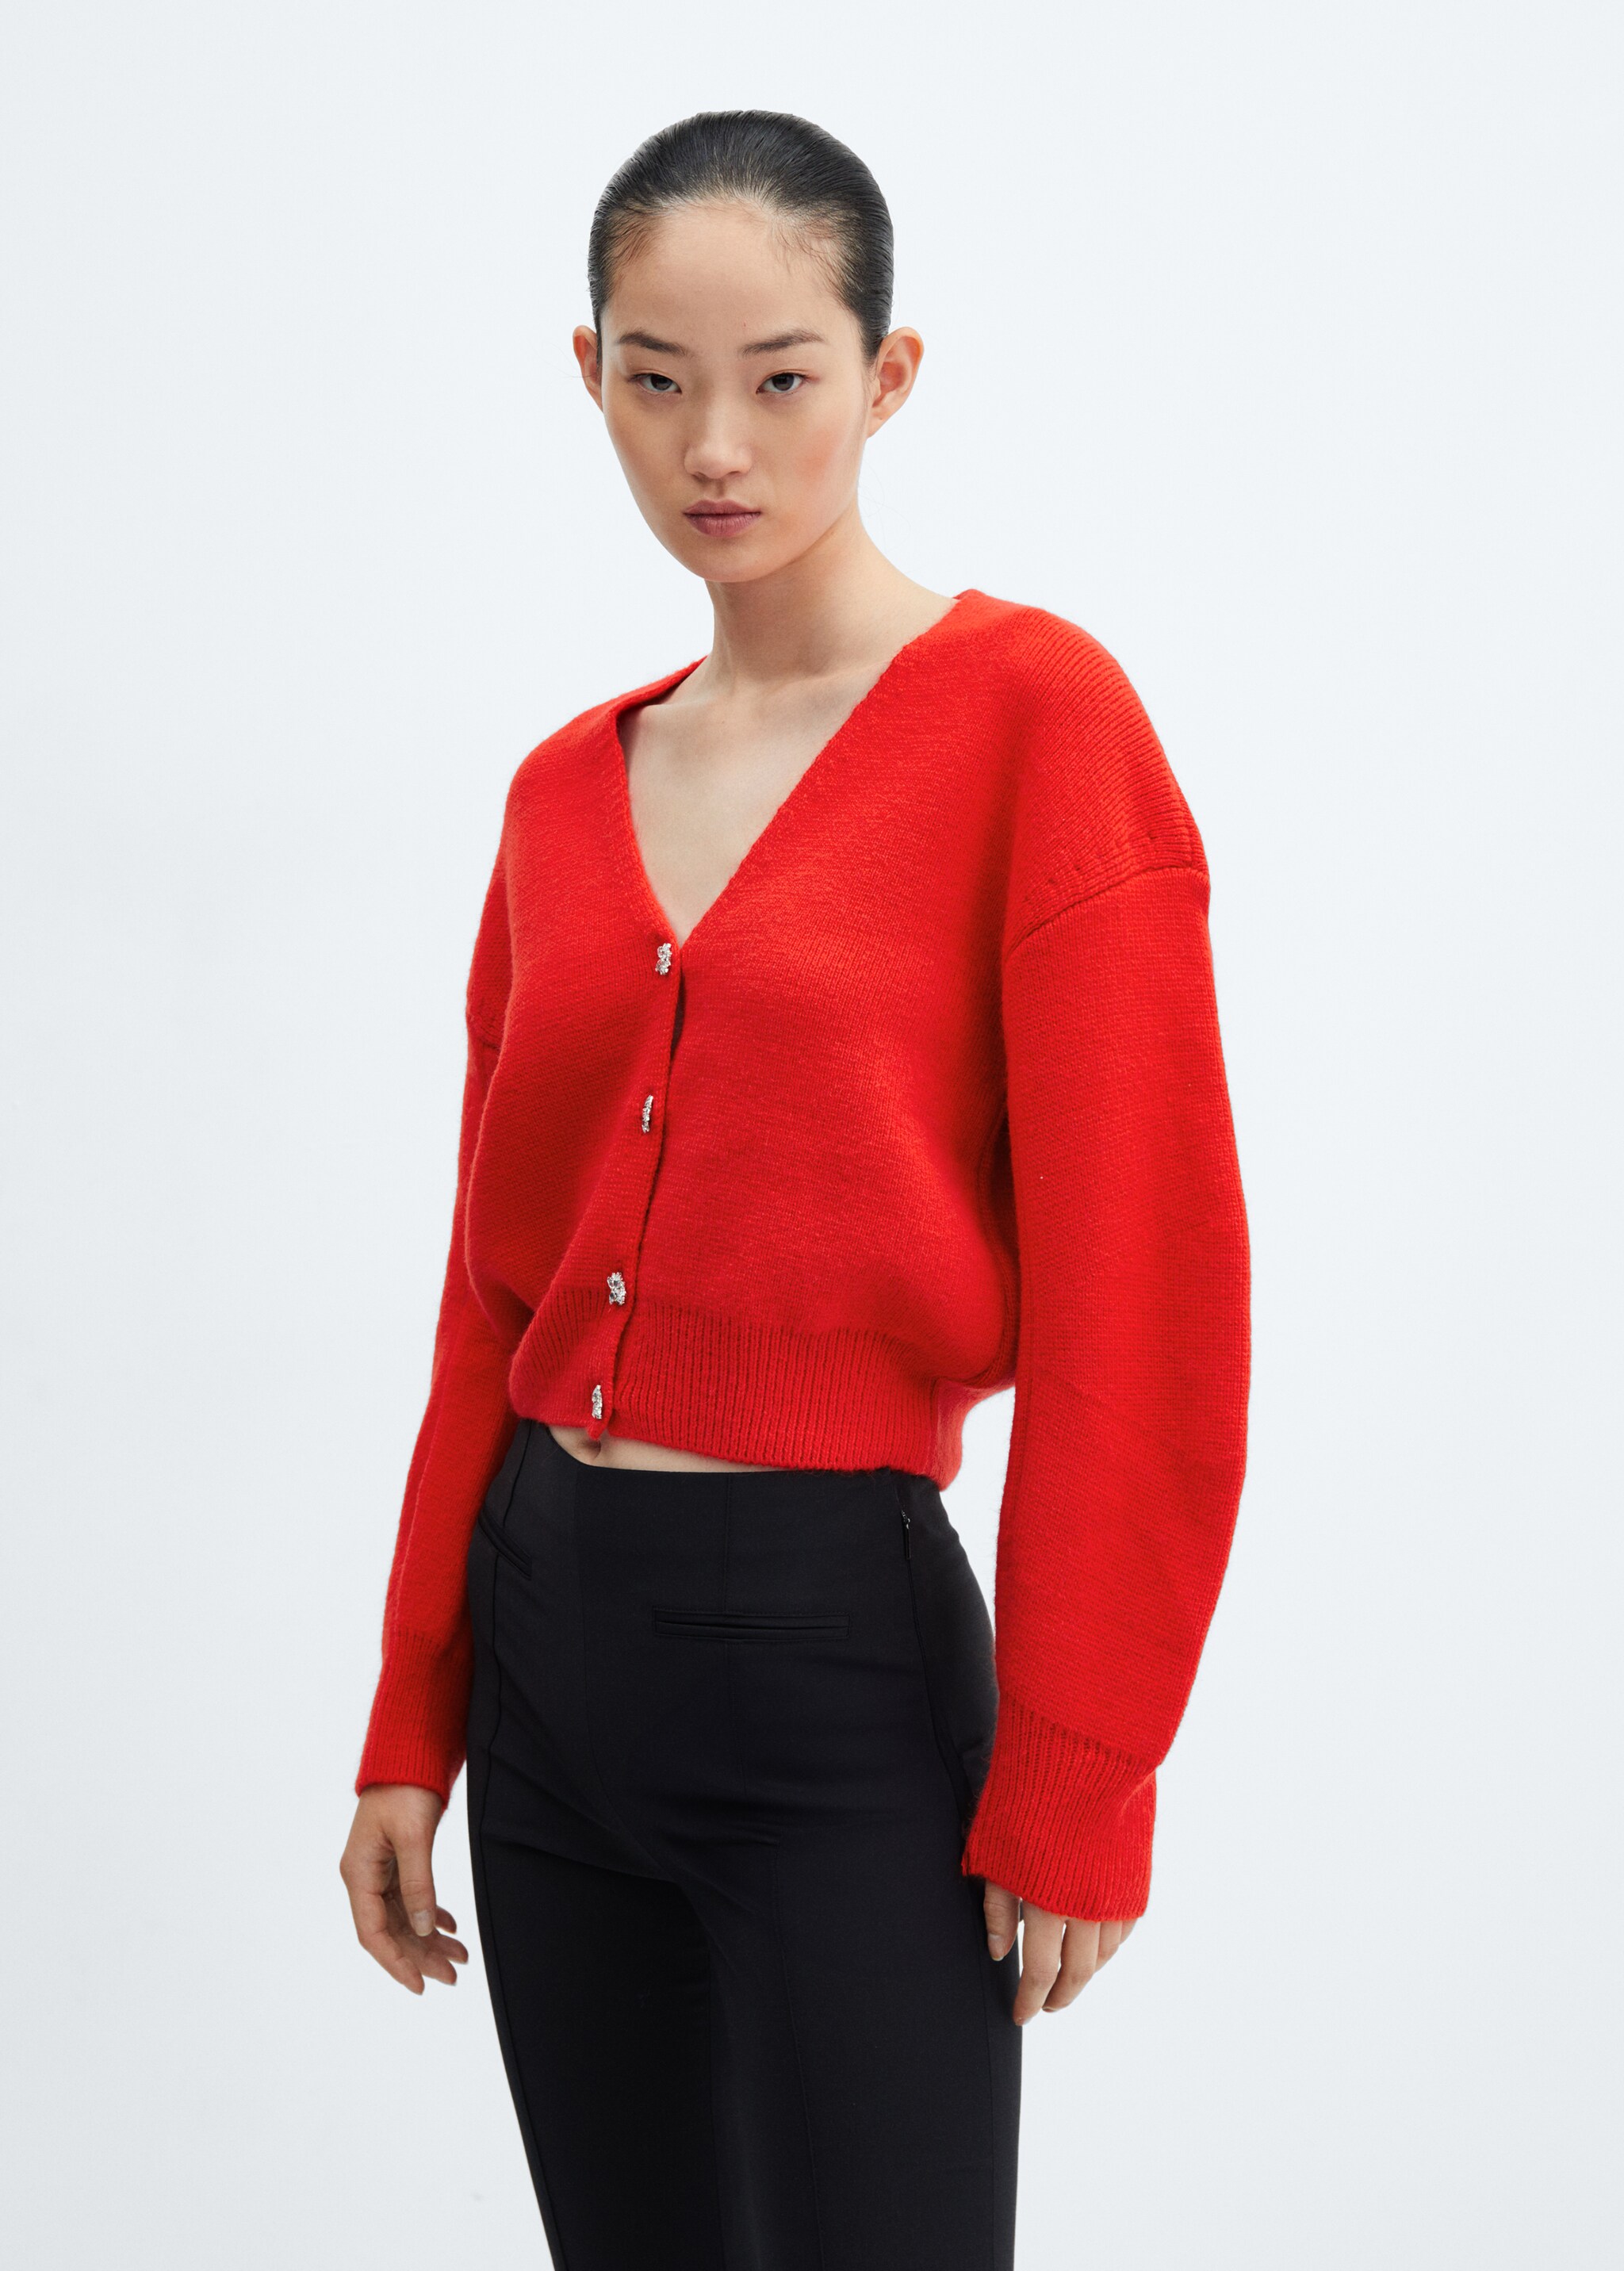 Knitted cardigan with jewel button  - Medium plane